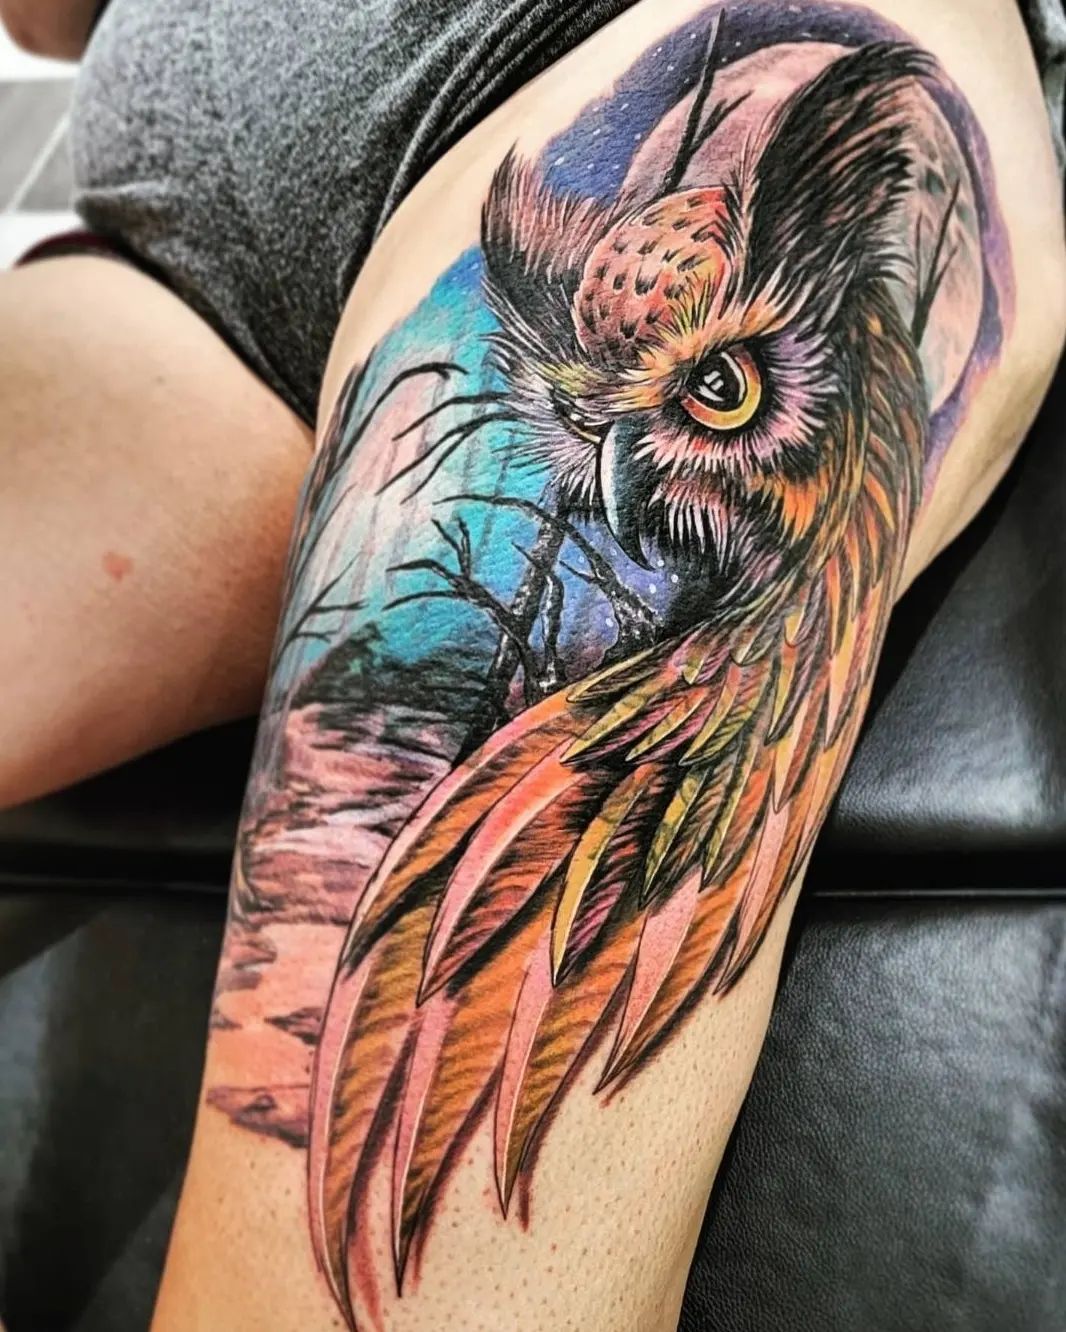 30 Inspirational Owl Tattoo Designs for Men and Women in 2022